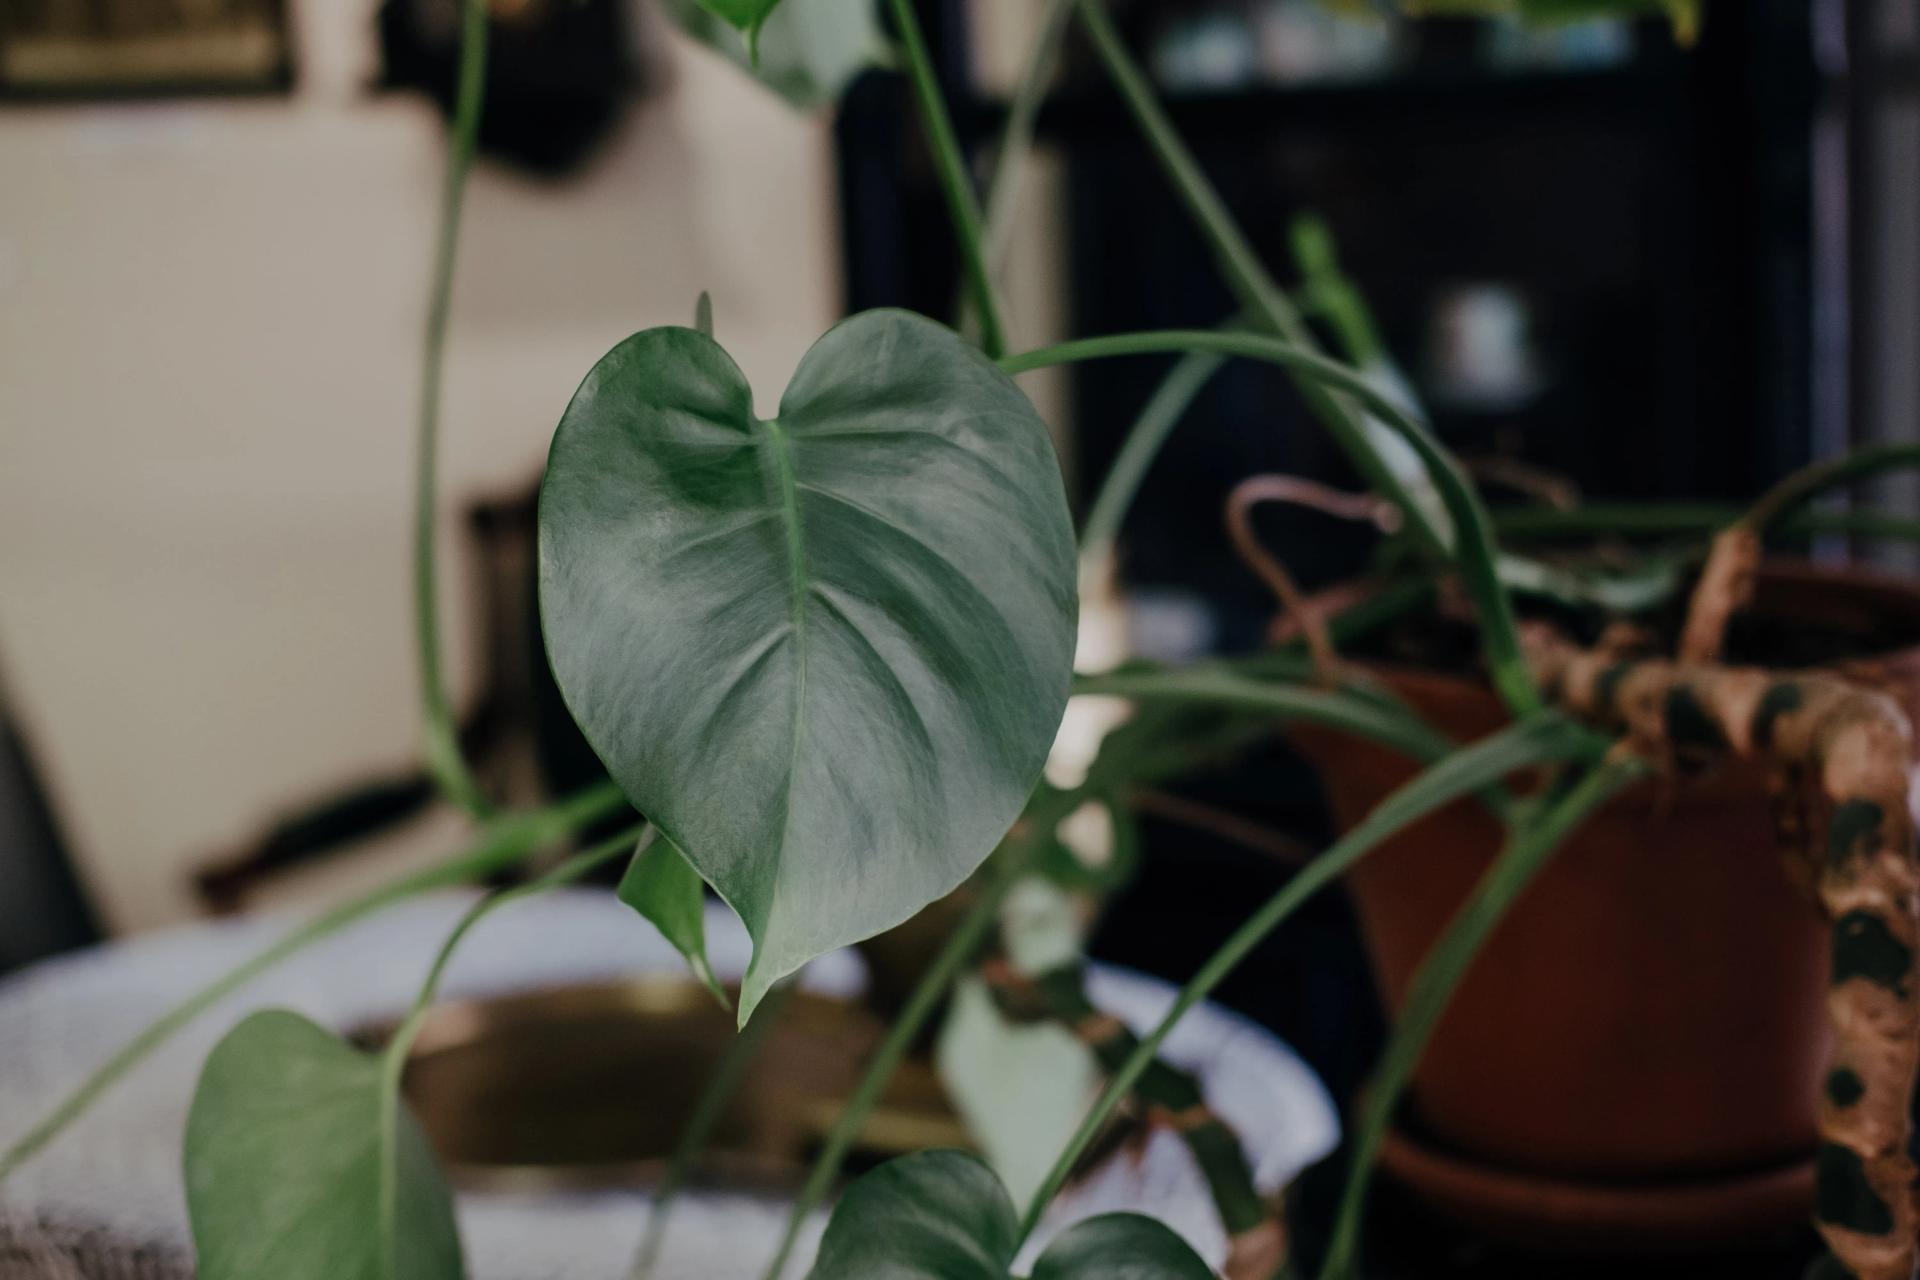 Potted Heartleaf Philodendron